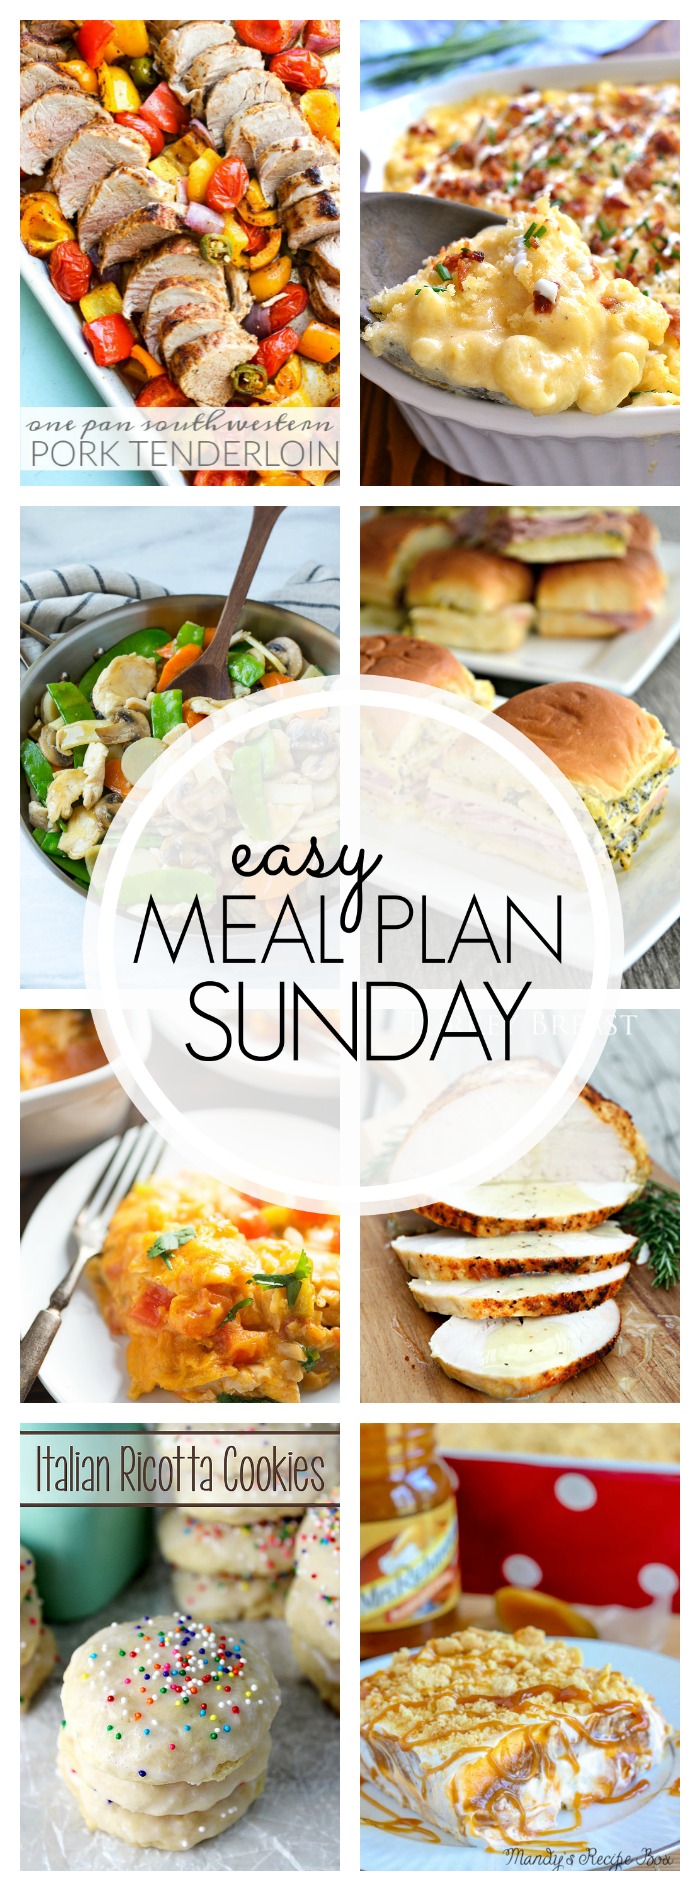 Easy Meal Plan Sunday #74